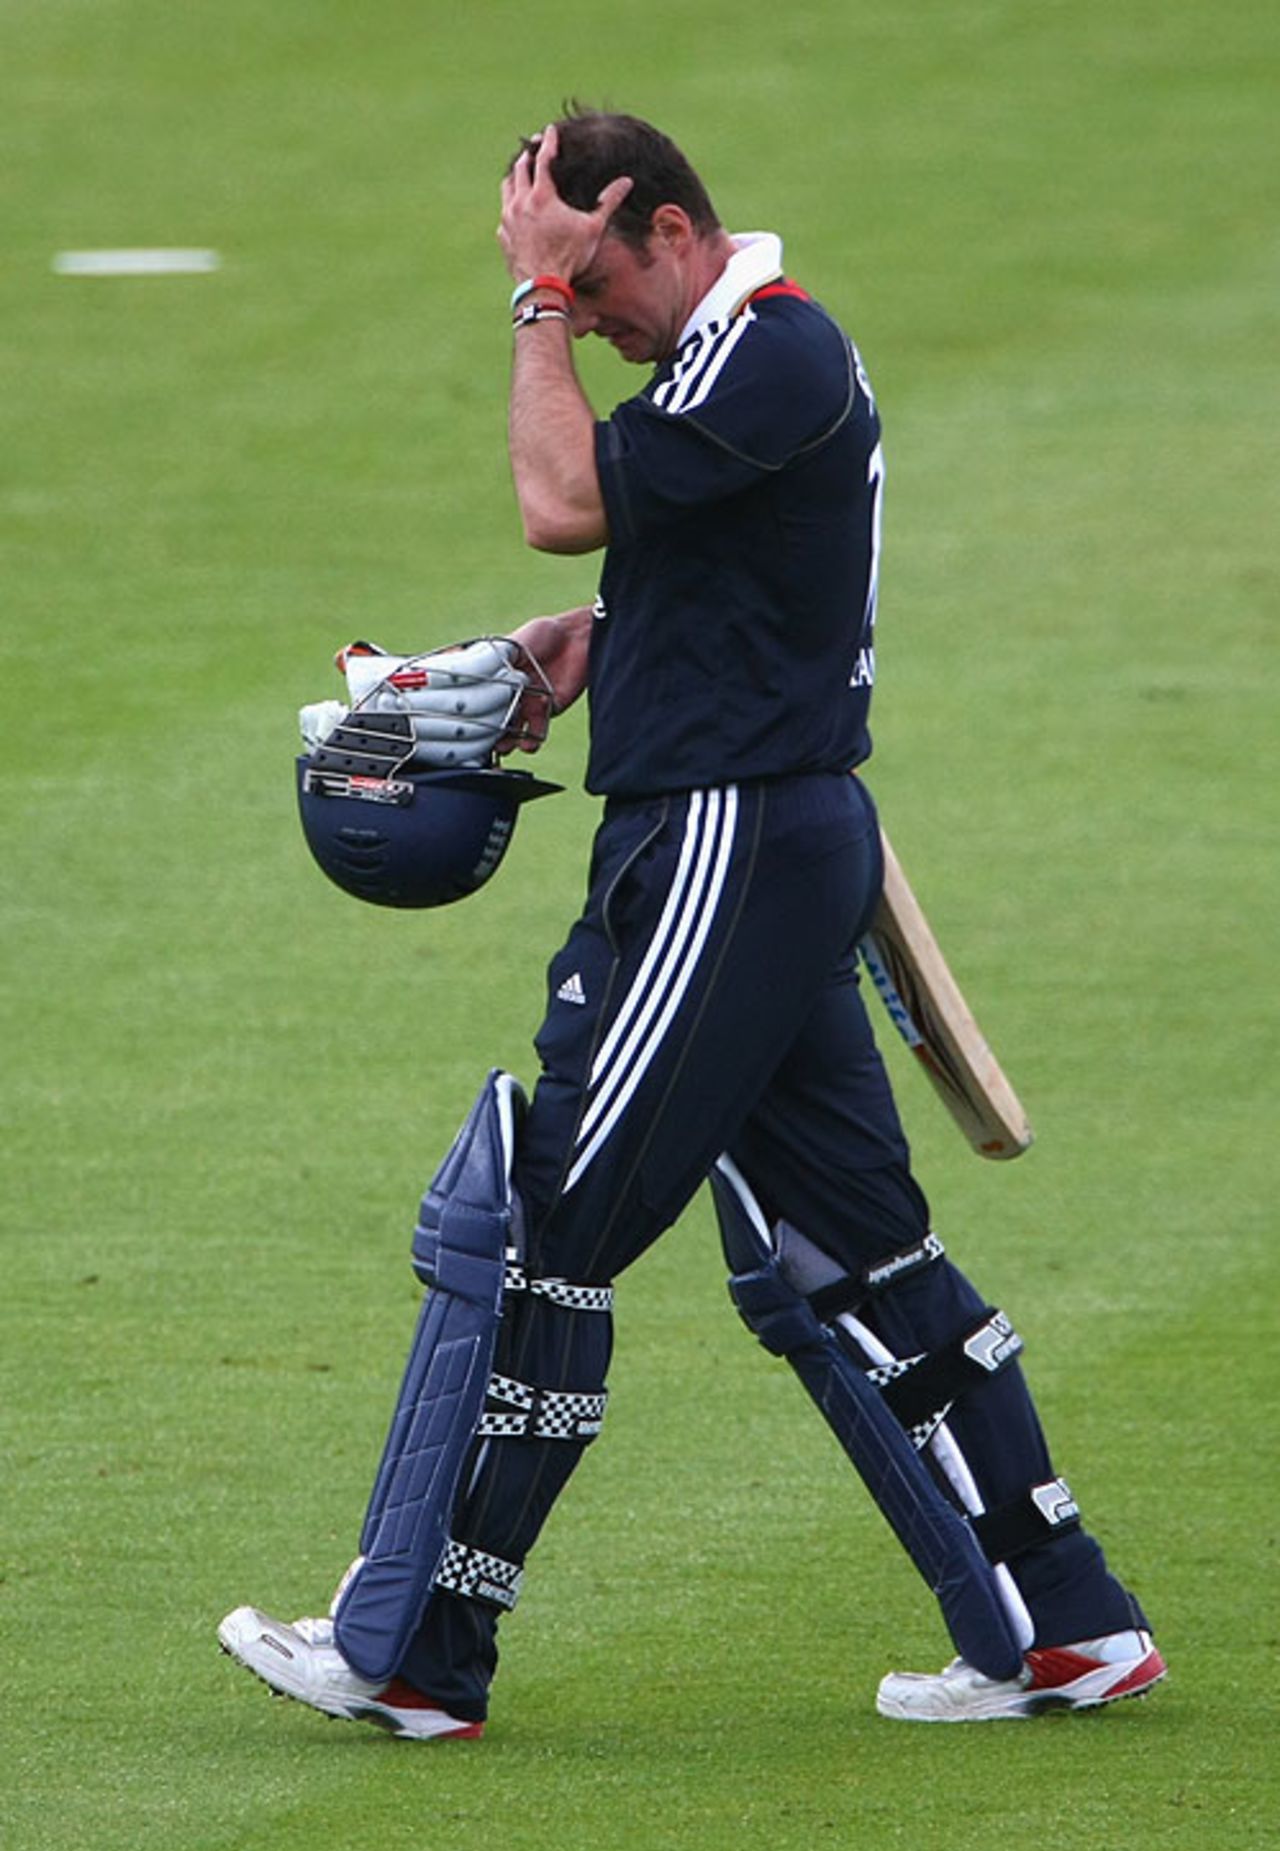 Andrew Strauss can't hide his disappointment after being stumped for 52, England v West Indies, 3rd ODI, Edgbaston, May 26, 2009